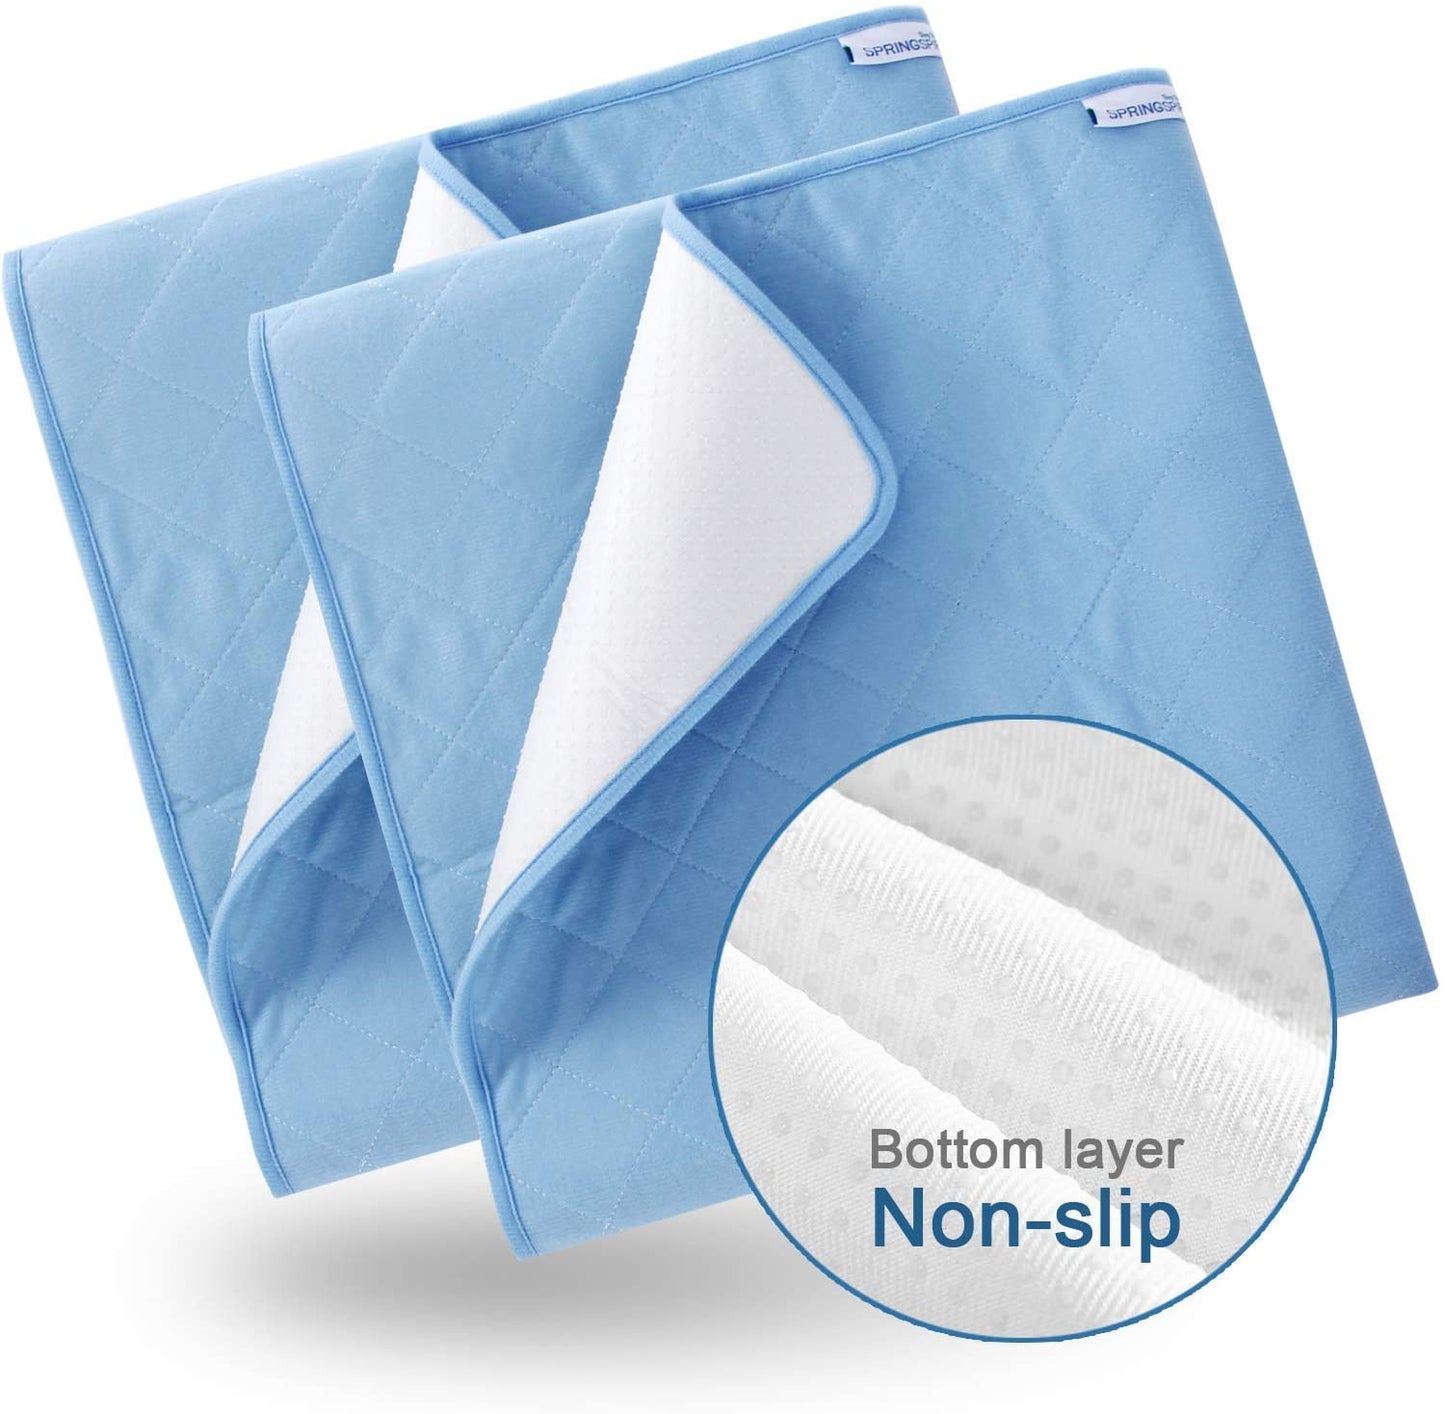 Soft 4-Layer Washable and Reusable Incontinence Bed pads, The Best Underpads  Sheet Protector for Children or Adults with Incontinence